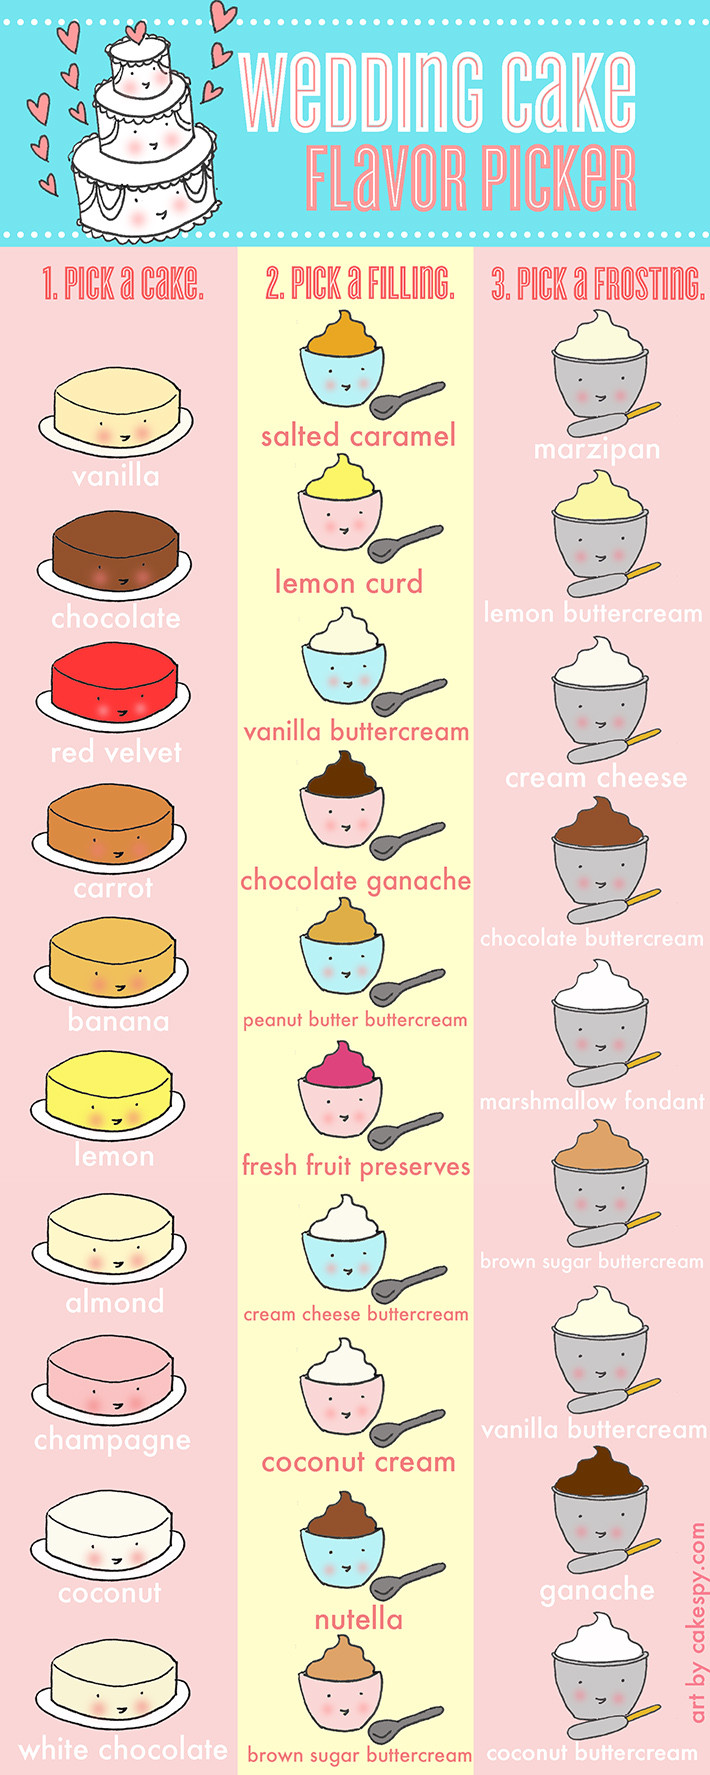 Types Of Wedding Cakes Flavors
 A Fun Wedding Cake Flavors Infographic Craftsy